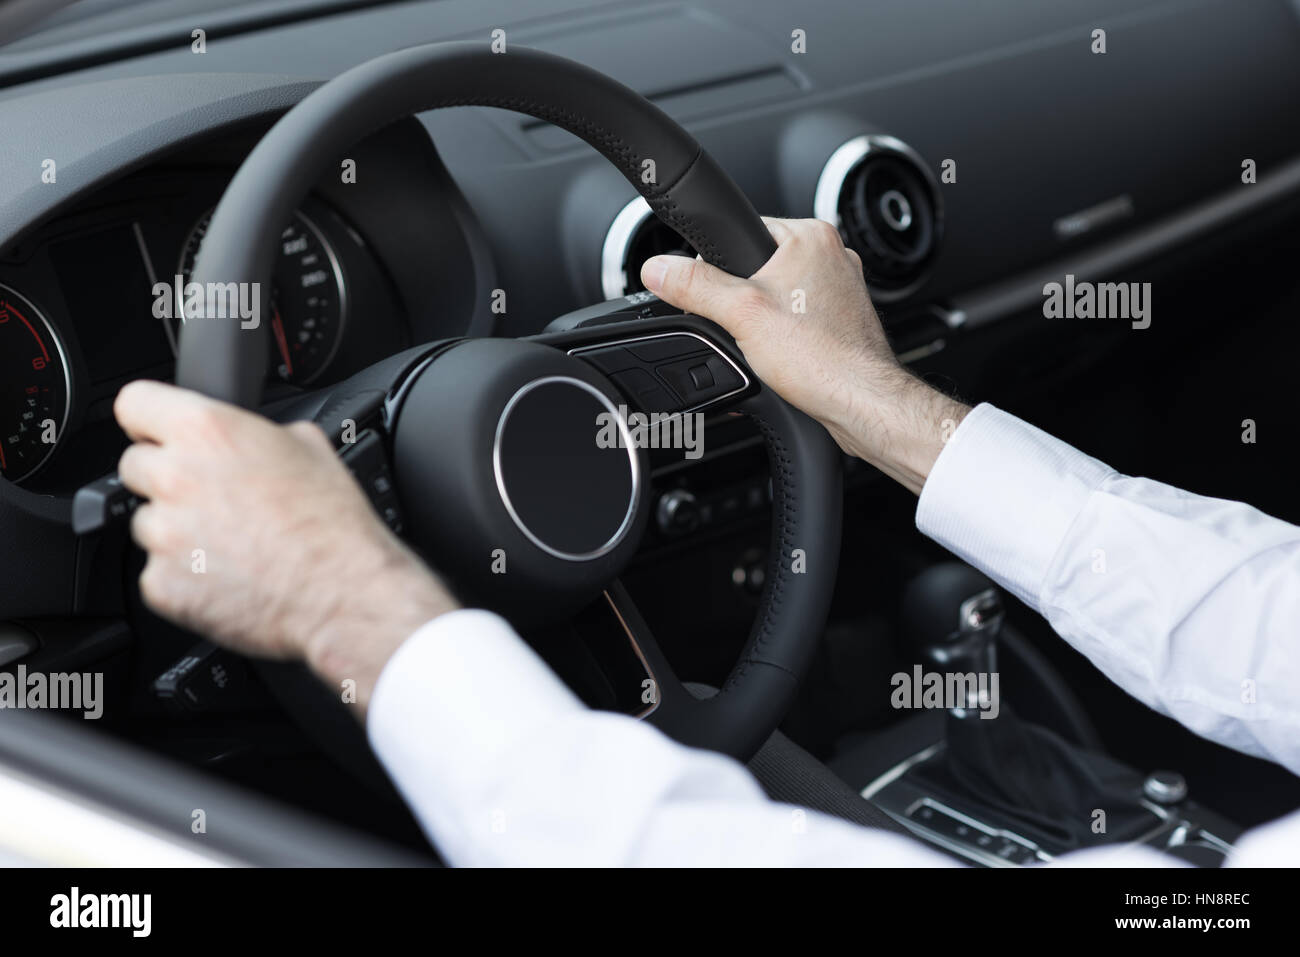 Successful businessman driving his car, hands on steering wheel close up Stock Photo